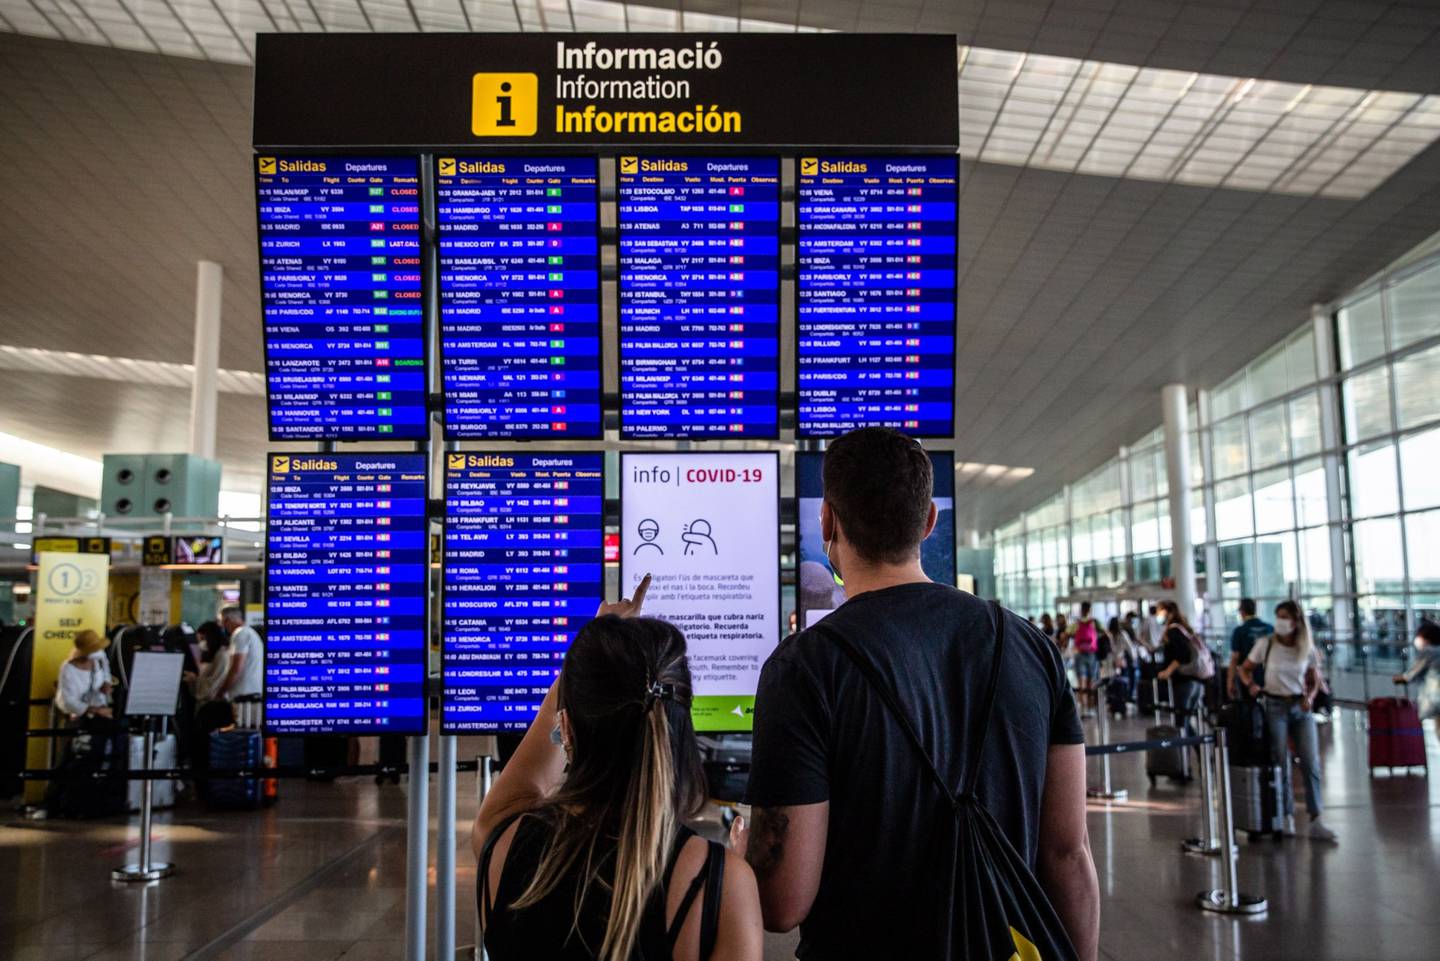 Passengers check the flight information boards in El Prat airport, operated by Aena SA, in Barcelona, Spain, on Monday, Aug. 2, 2021.